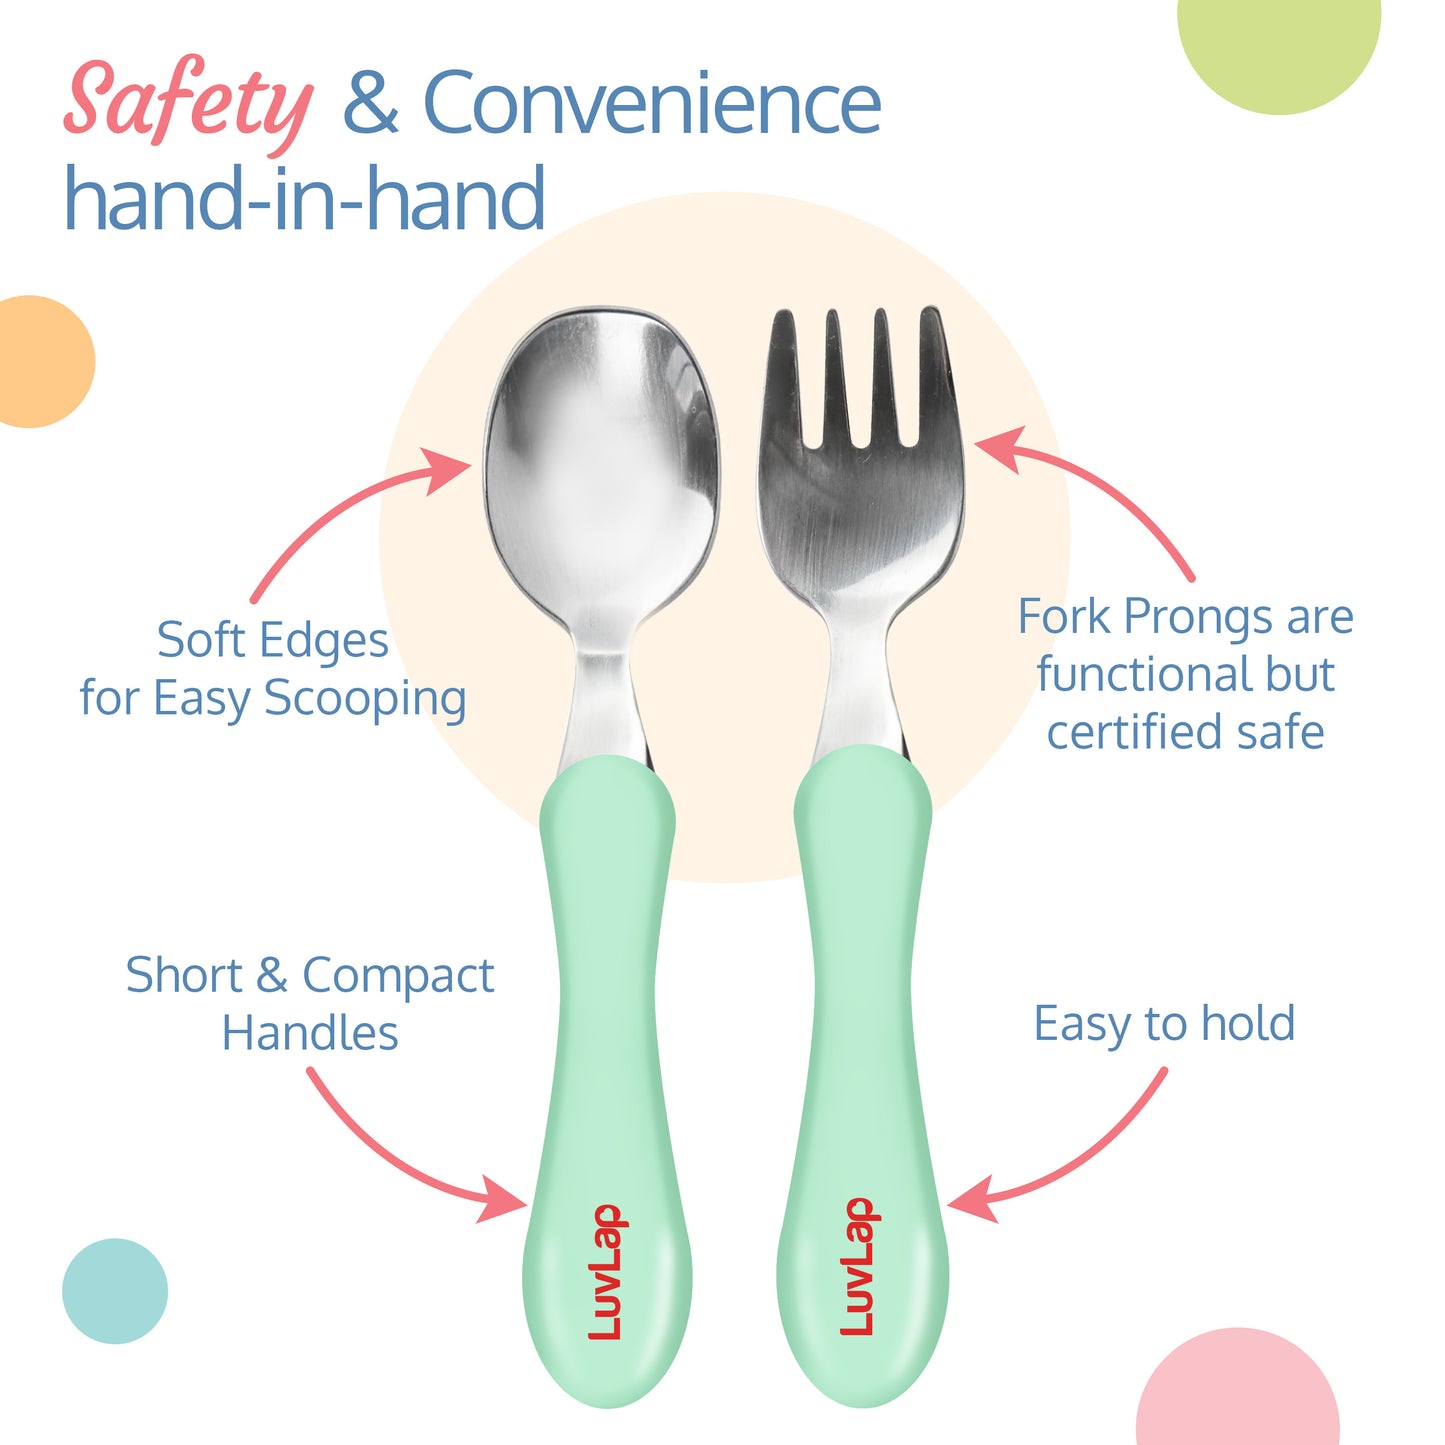 Premium Stainless Steel Baby Spoon & Fork Set for Baby Feeding, Stainless Steel Spoon and Fork Set, Food Grade PP Spoon, BPA Free Feeding Spoon for Kids of 12+ Months (Light Green)